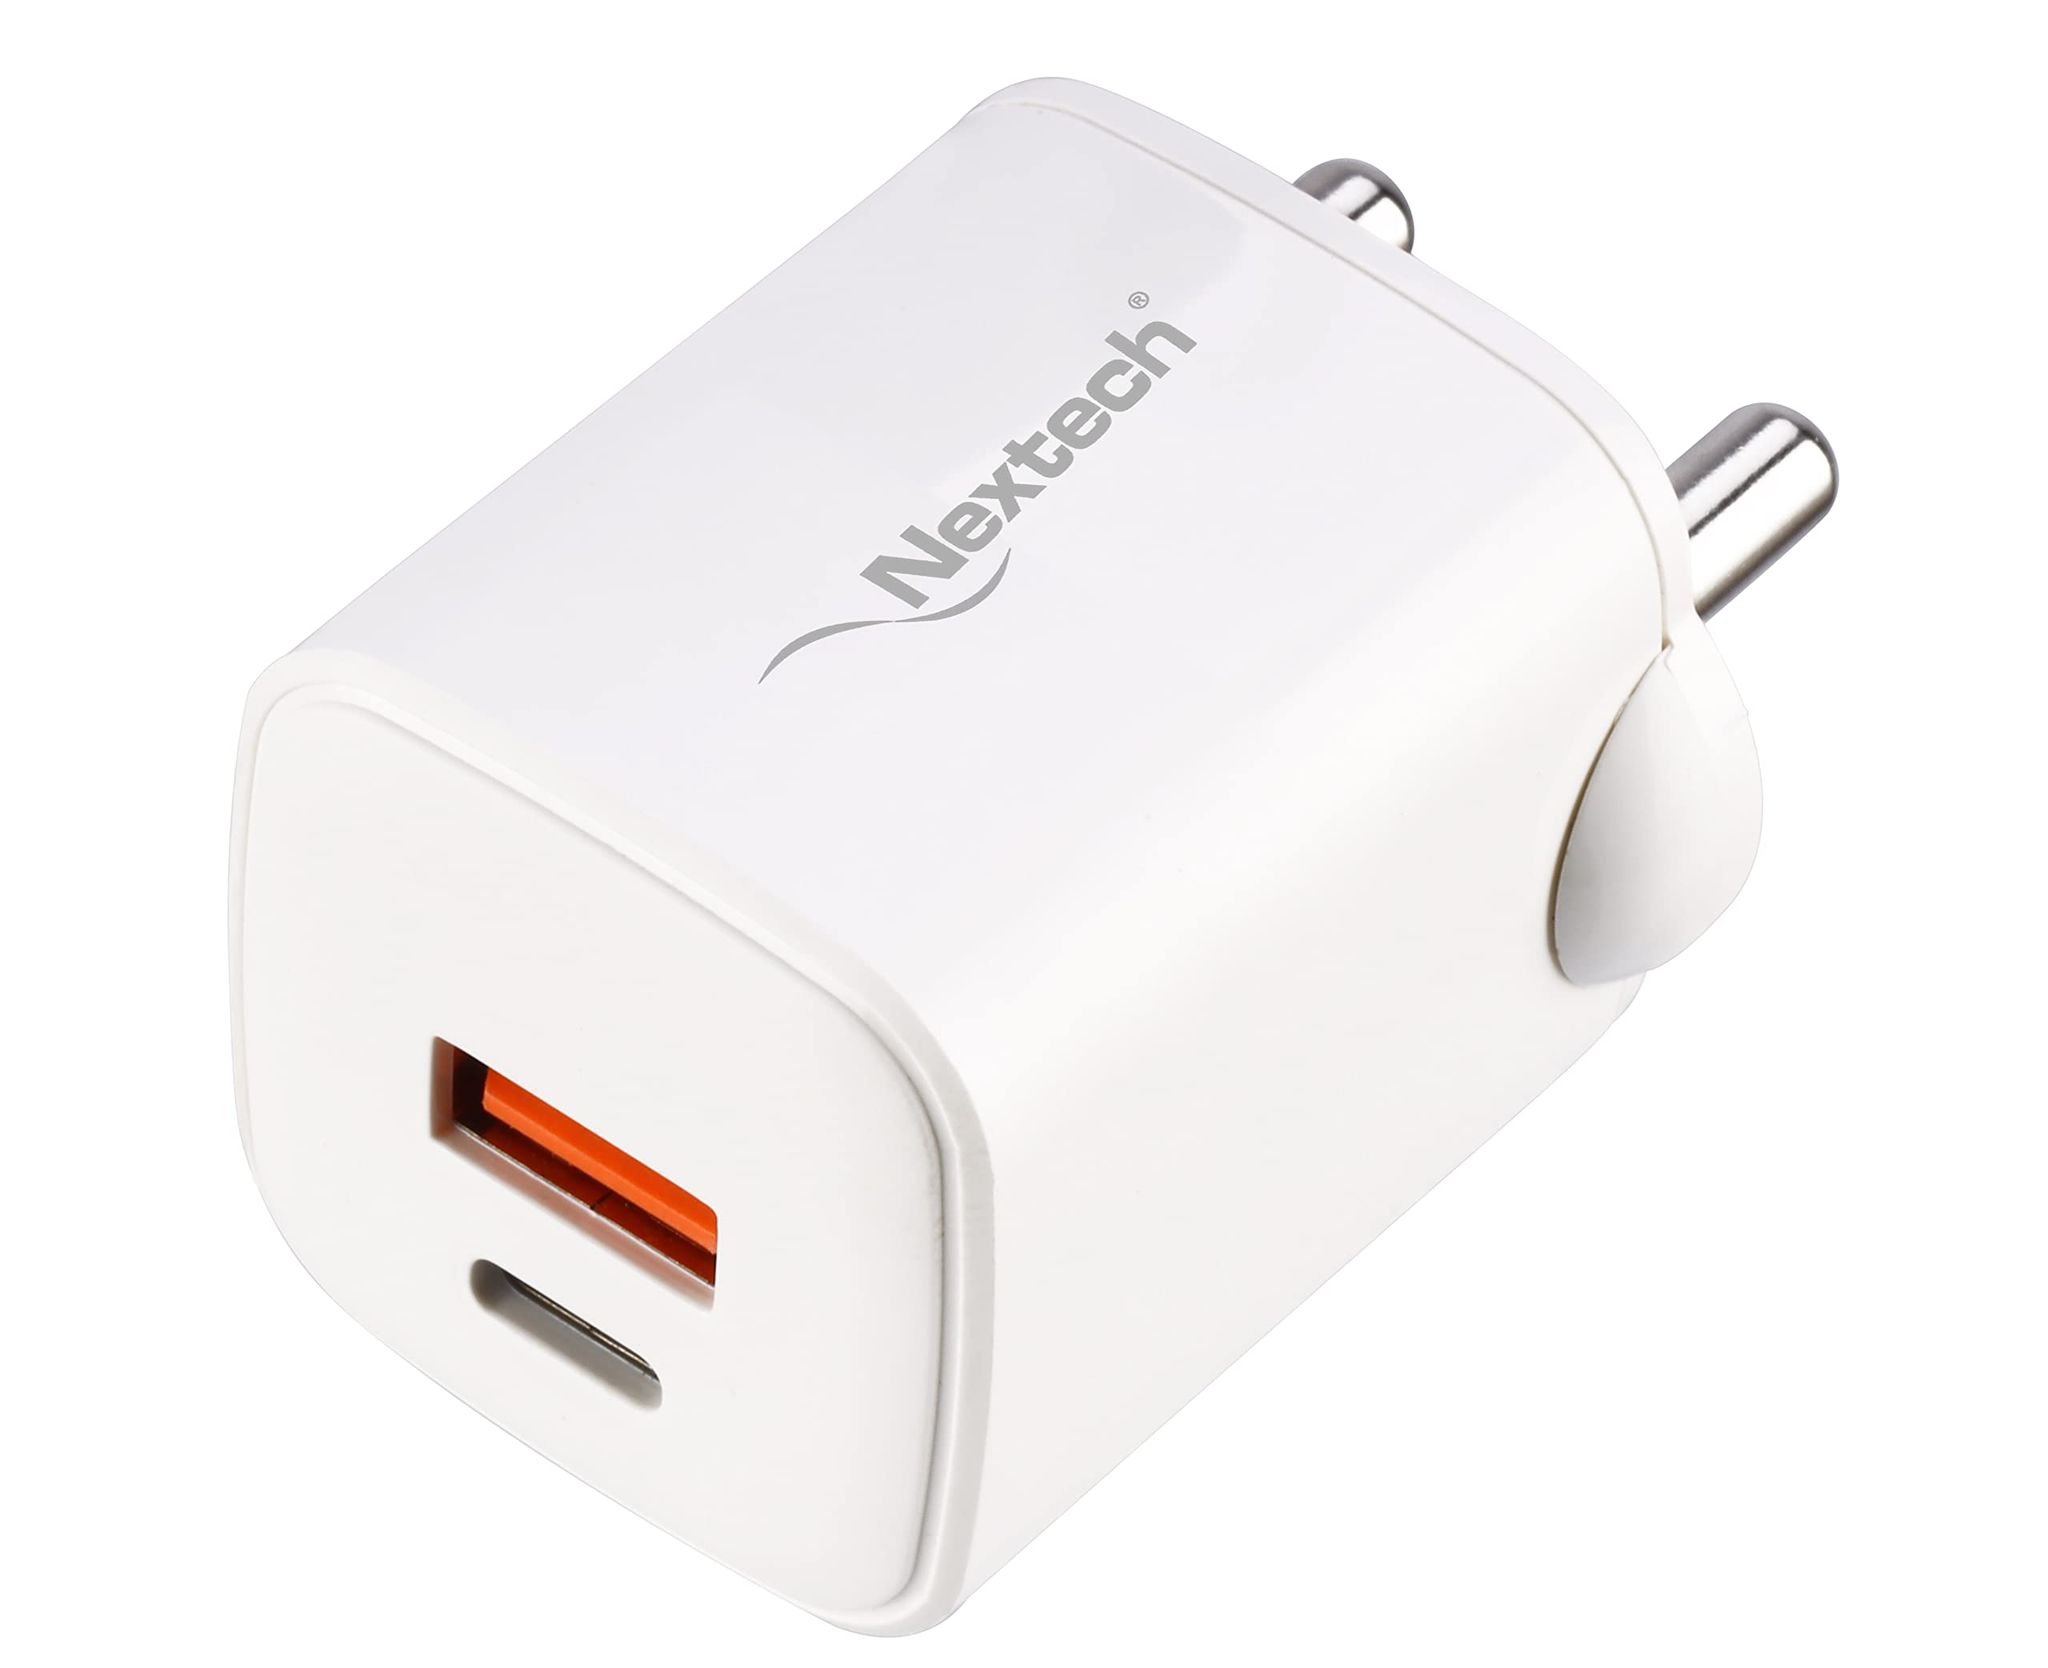 Nextech 35W Dual Port PDQC3.0 GaN & PPS Technology Fast Wall Charger Compatible with iPhones, iPads, Tablets, Android & Smartphones